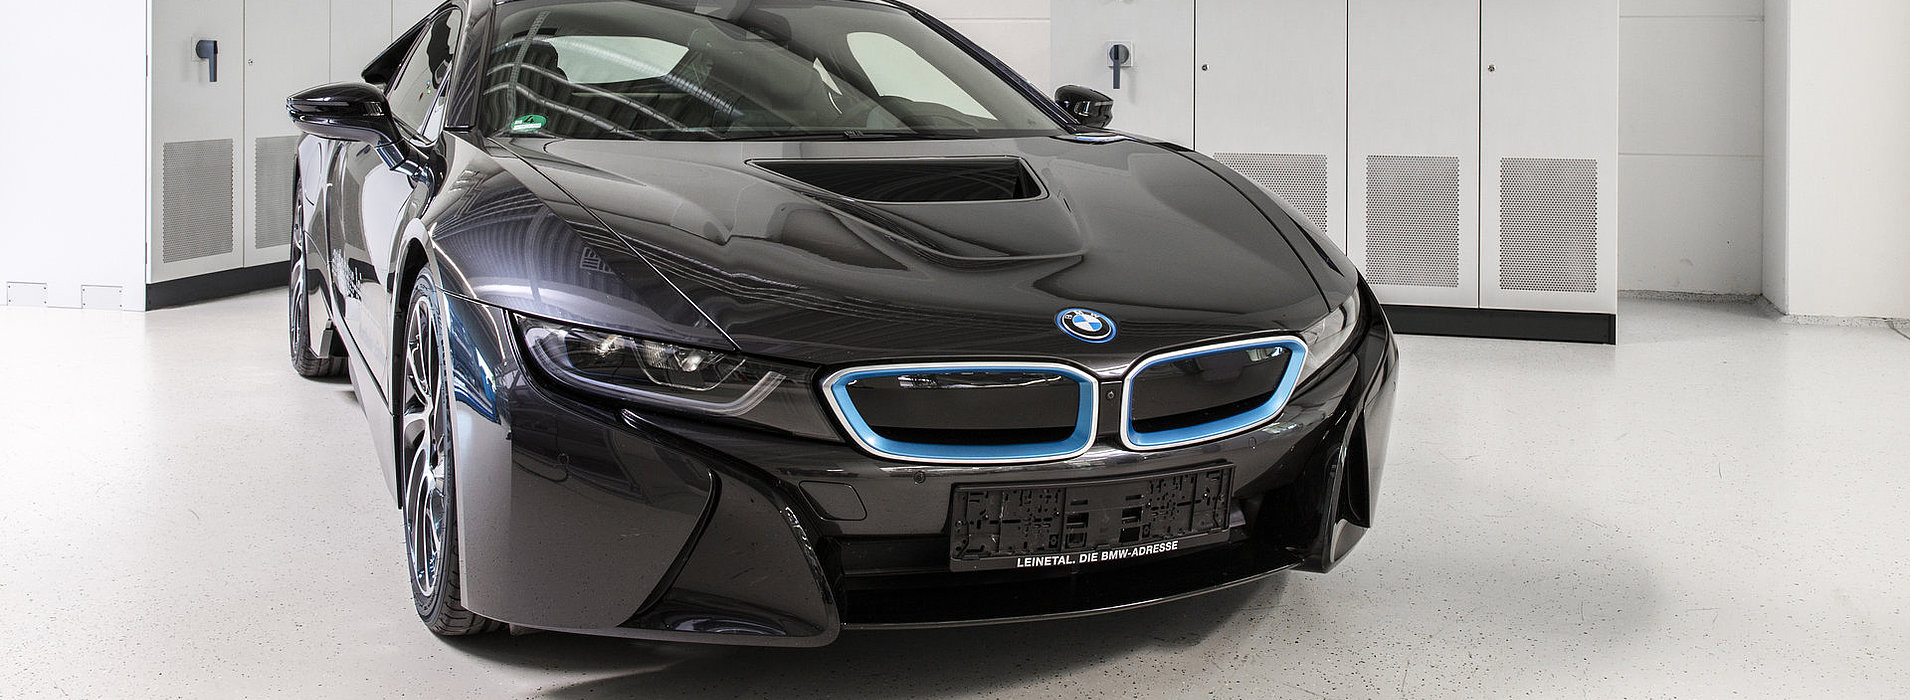 Close-up of a BMW i8 in the Production Hall